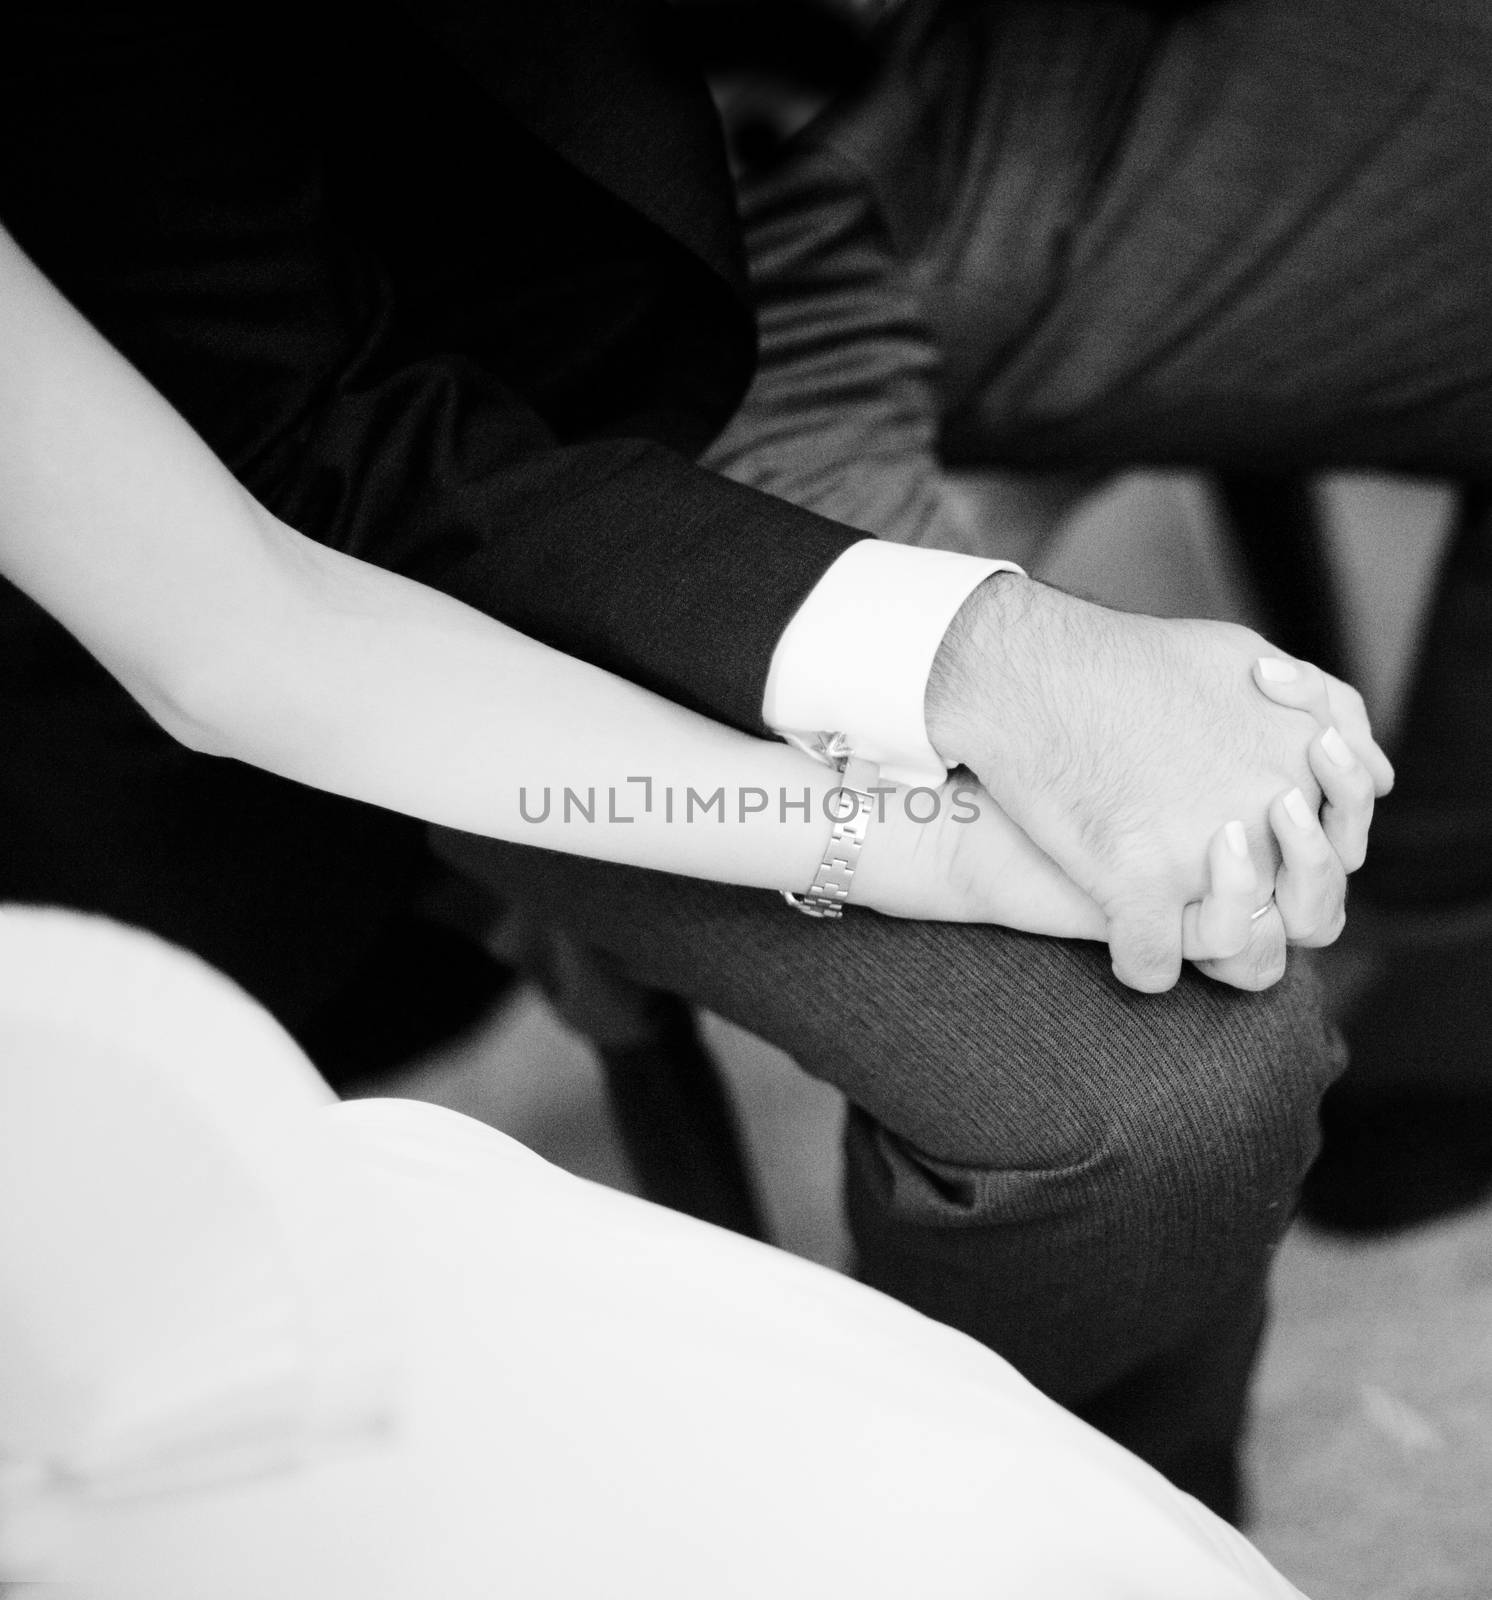 Black and white artistic digital rectangular horizontal photo of the bride wearing white wedding dress and bridegroom sitting holding hands during church wedding marriage ceremony in Madrid Spain. Shallow depth of on foreground with background out of focus.